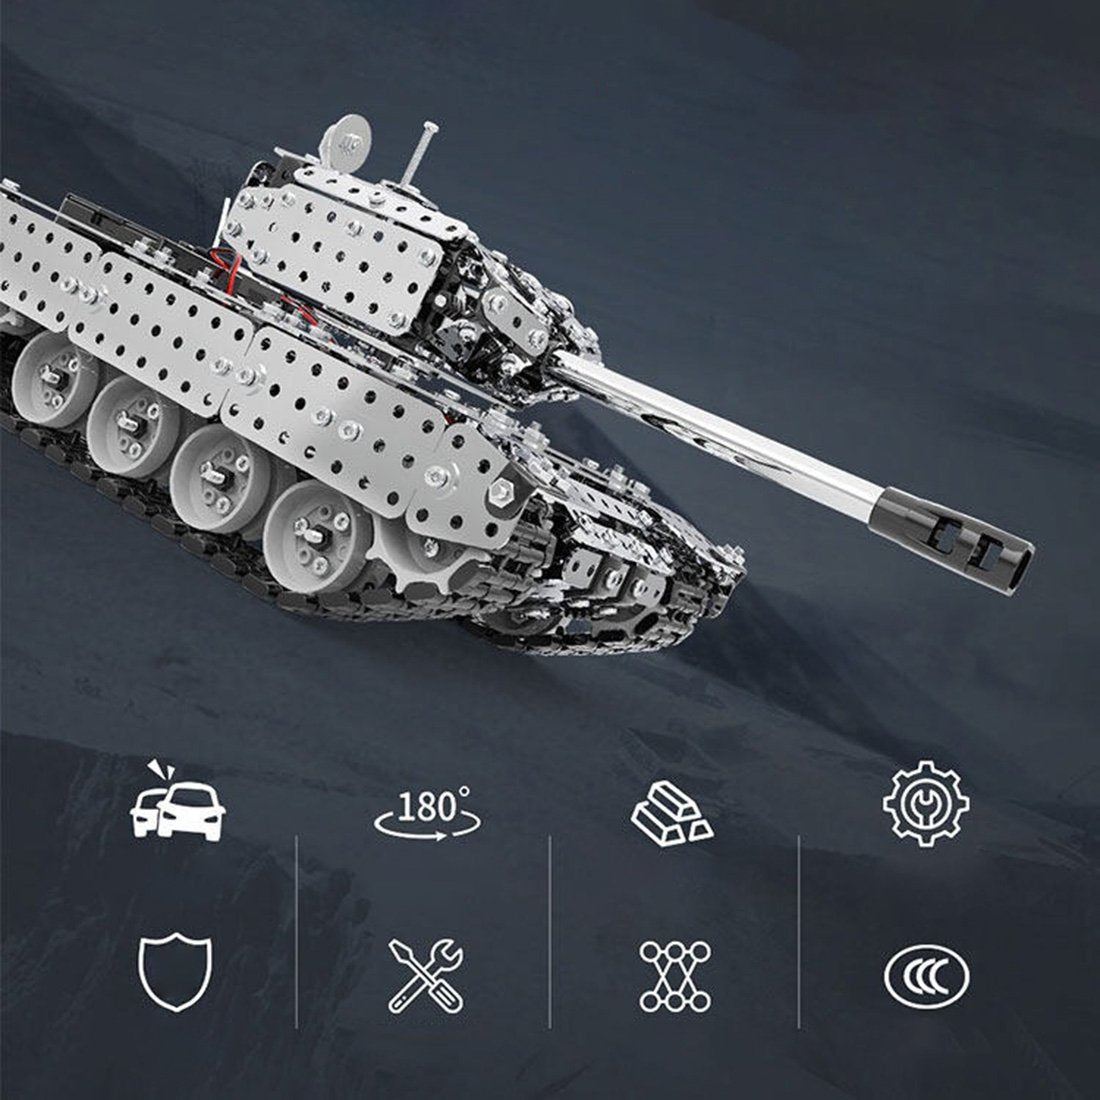 843Pcs 3D Scew Metal Mechanical Military Tank Model Kit Assembly Puzzle Toy